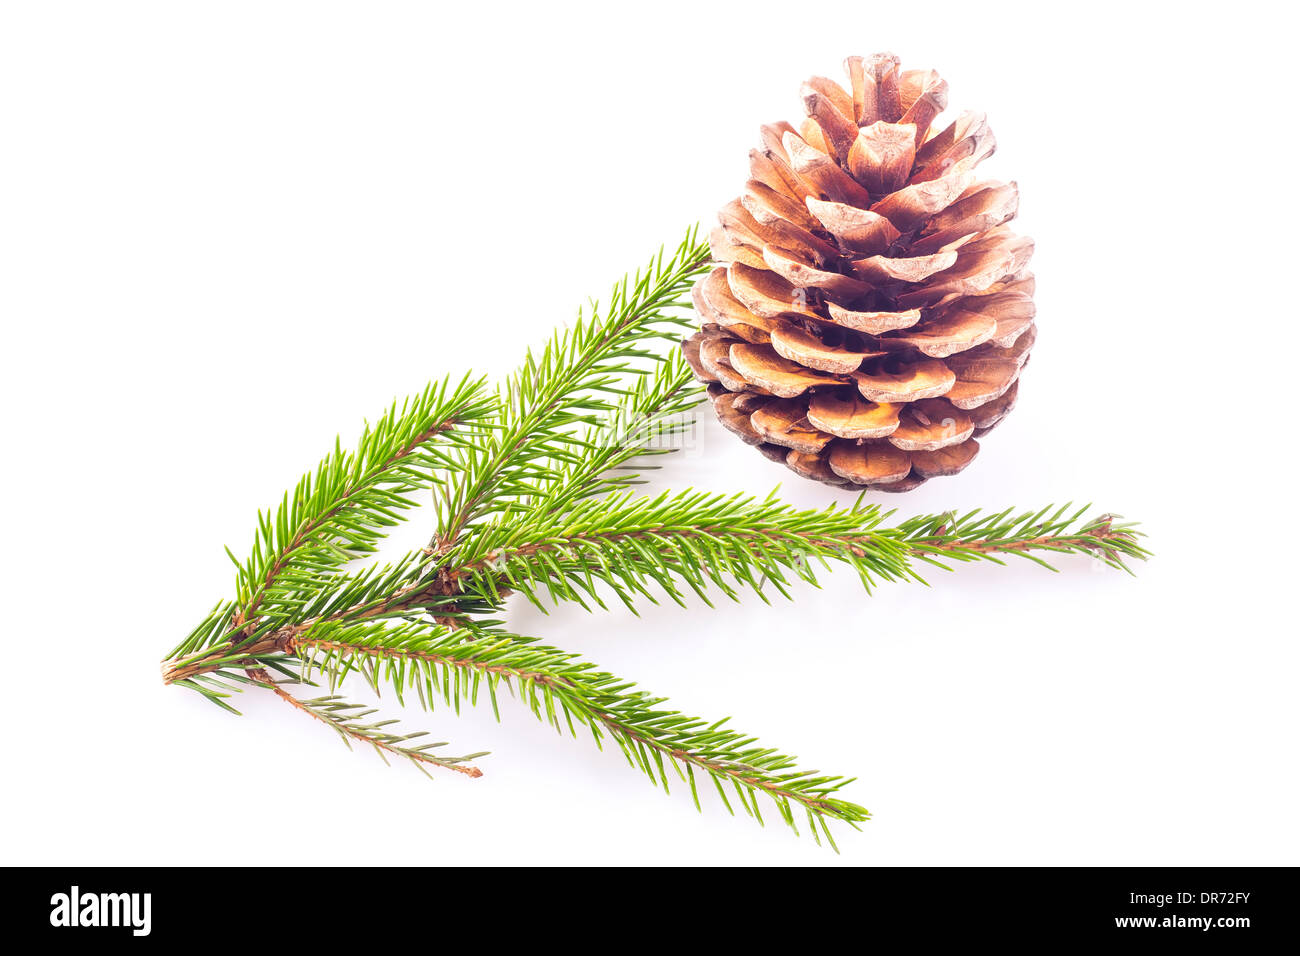 Fir cone and spruce branch on white background Stock Photo